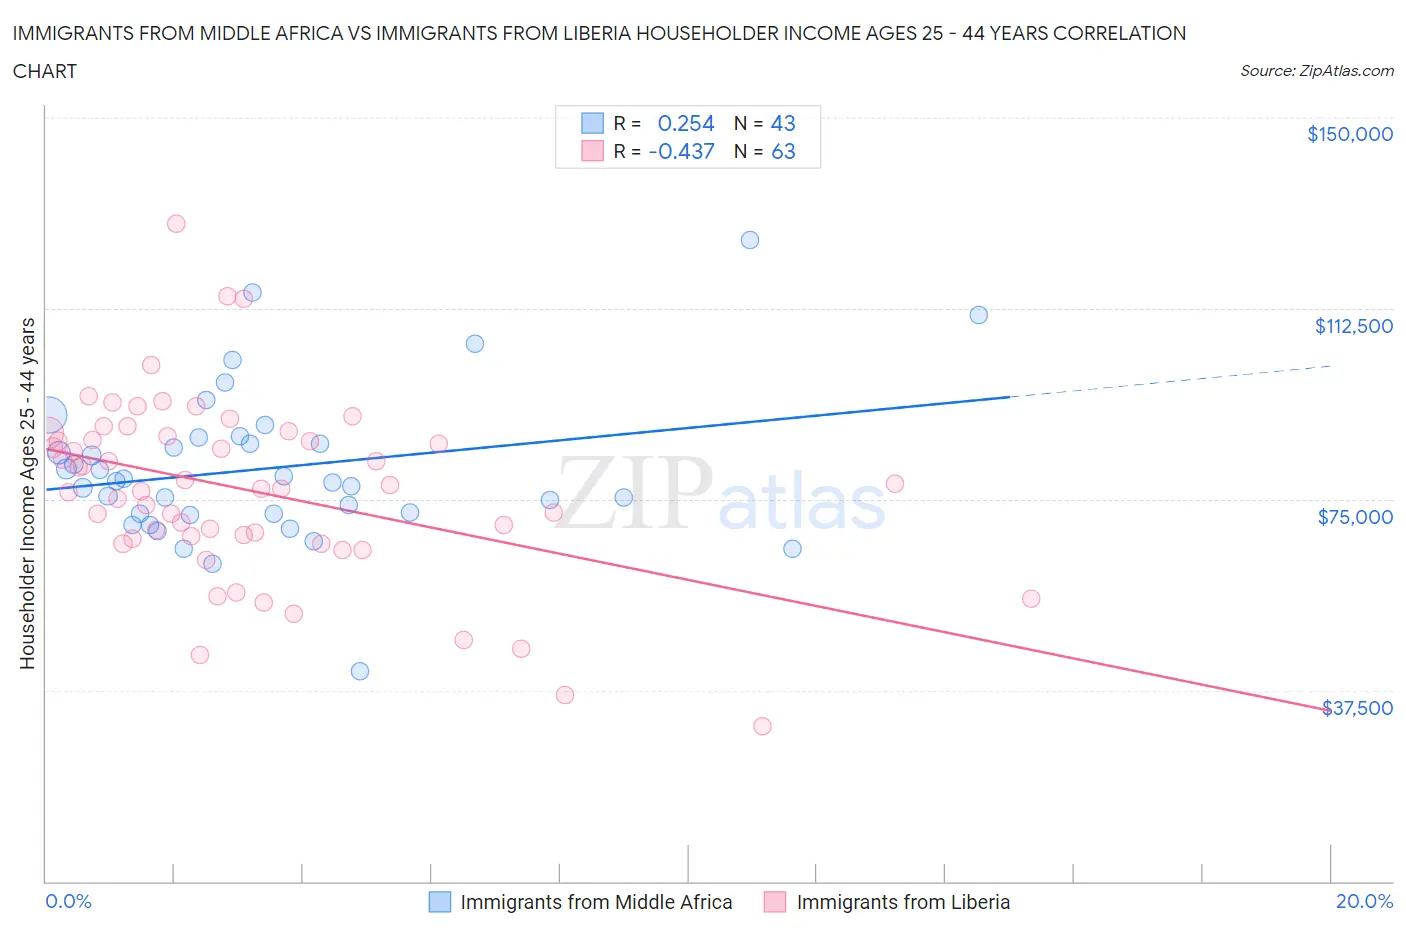 Immigrants from Middle Africa vs Immigrants from Liberia Householder Income Ages 25 - 44 years